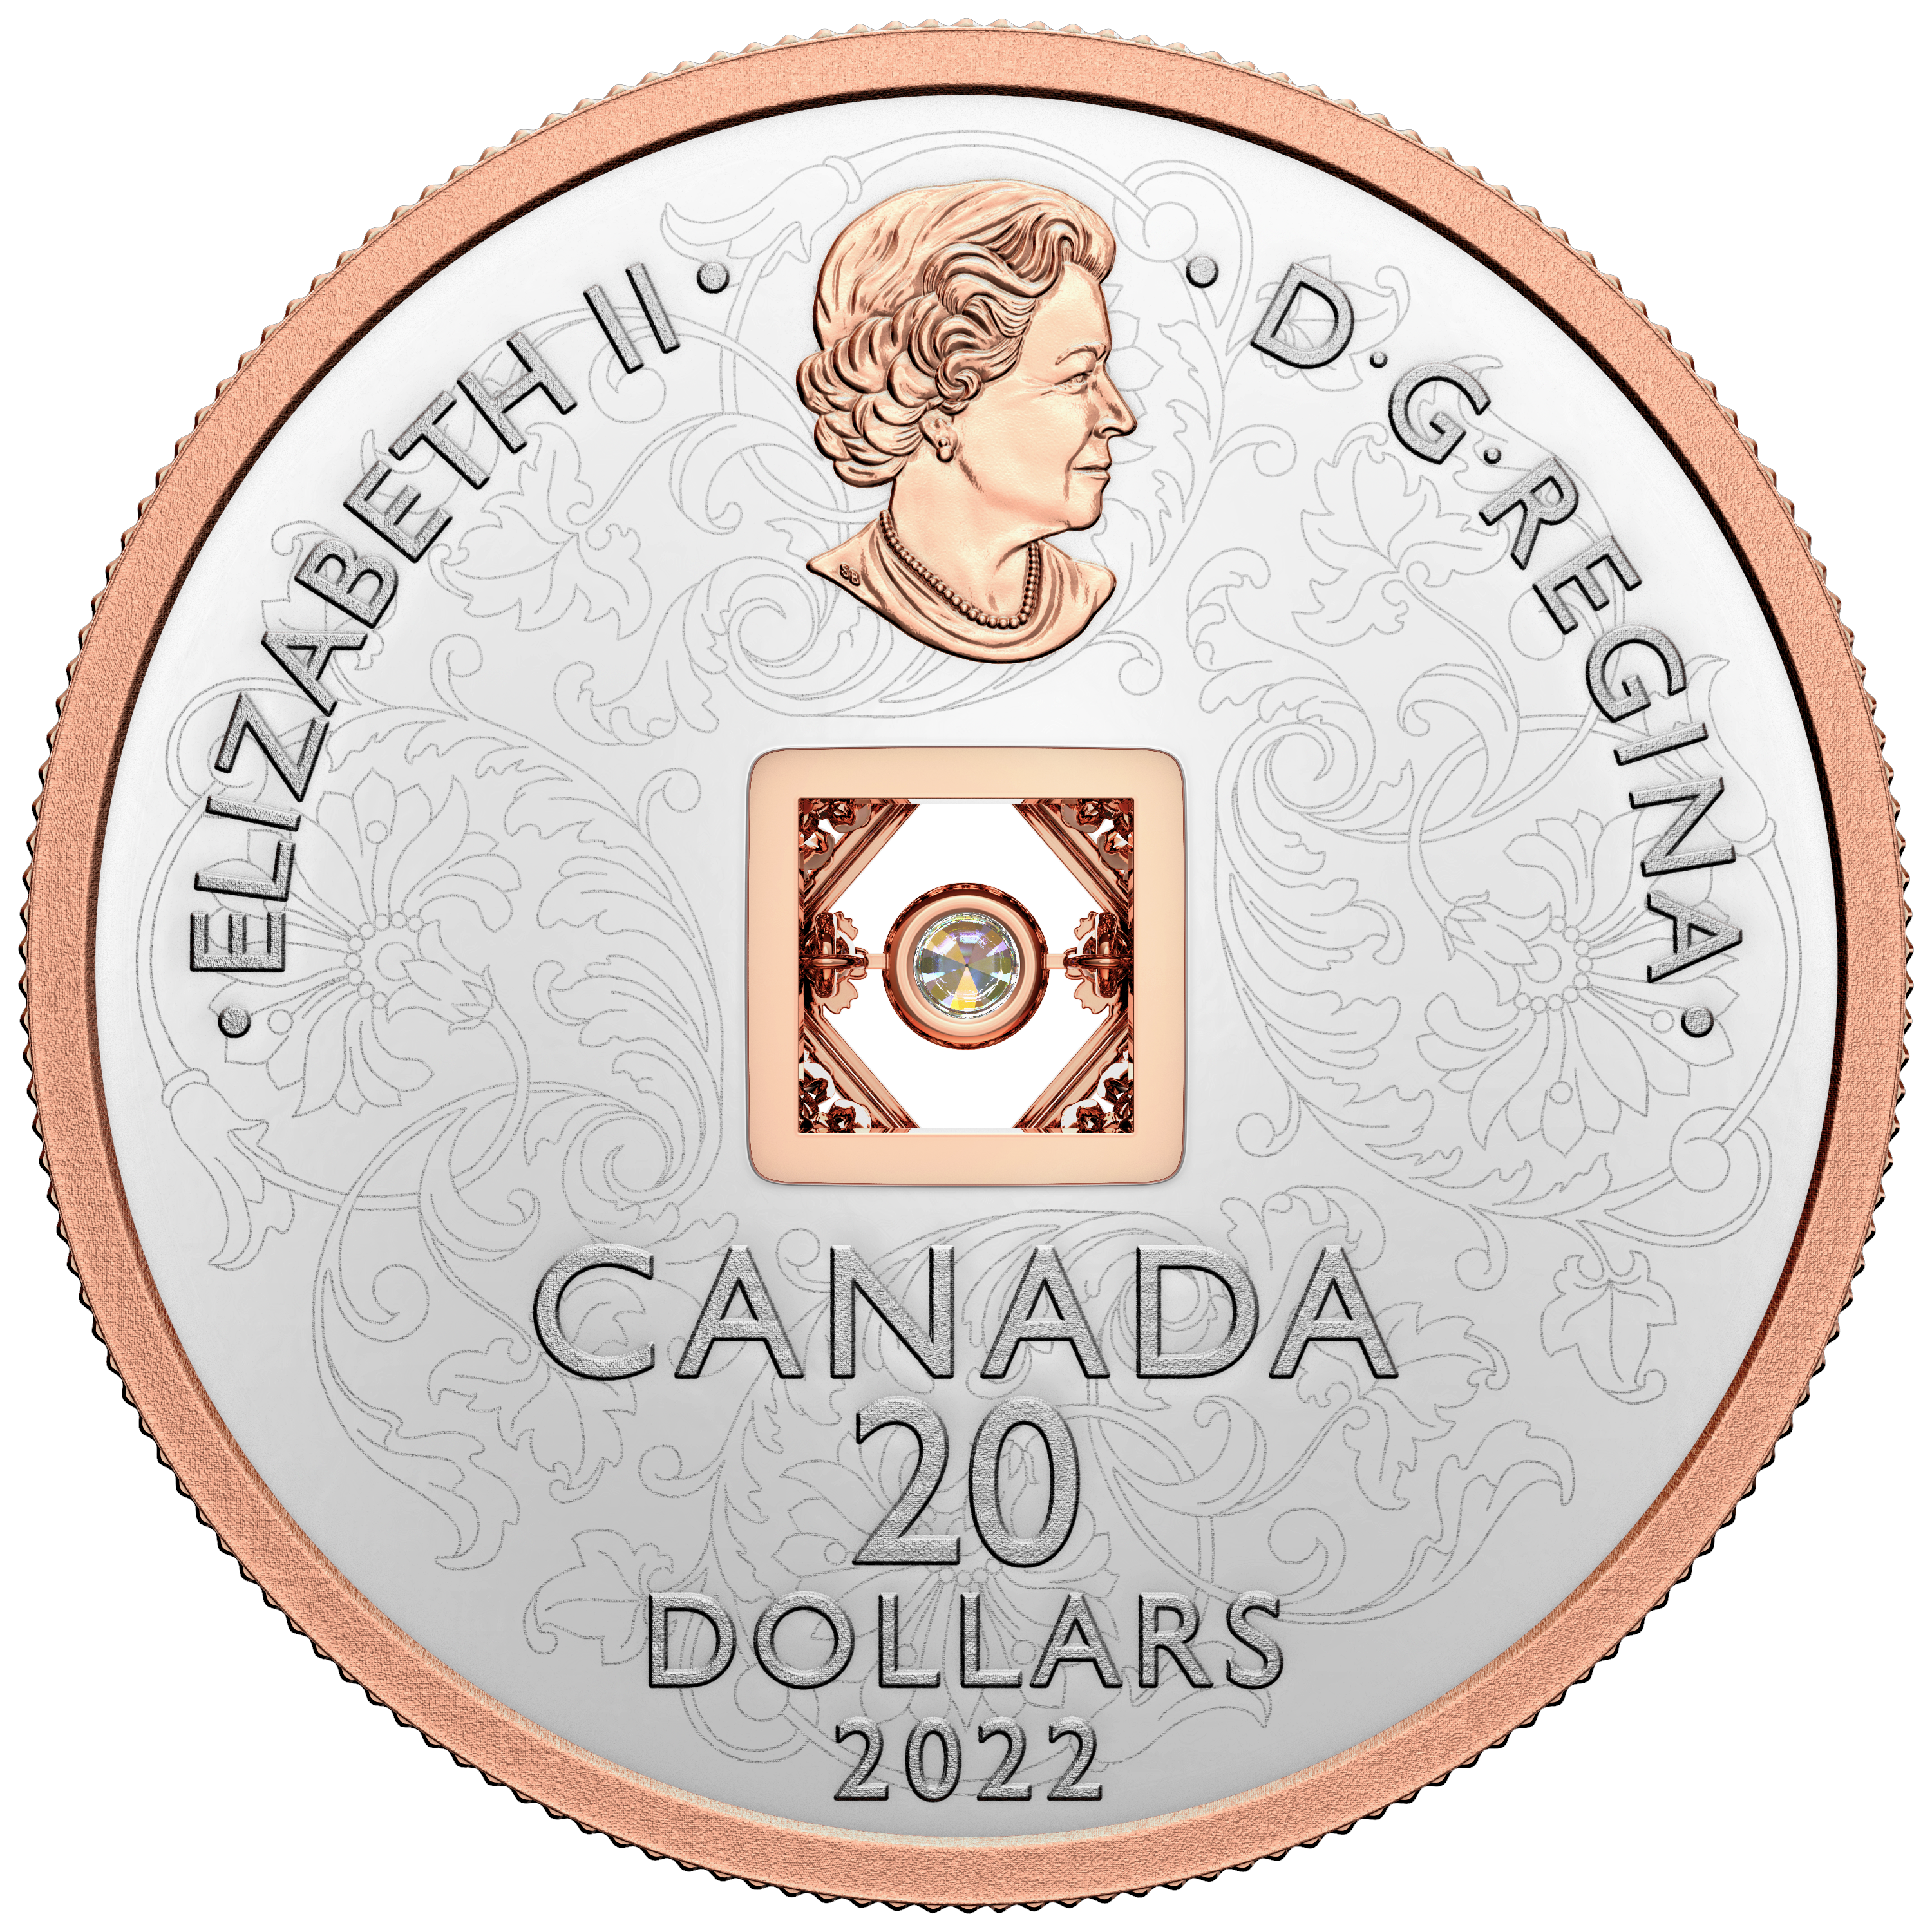 SPARKLE OF THE HEART Silver Coin $20 Canada 2022